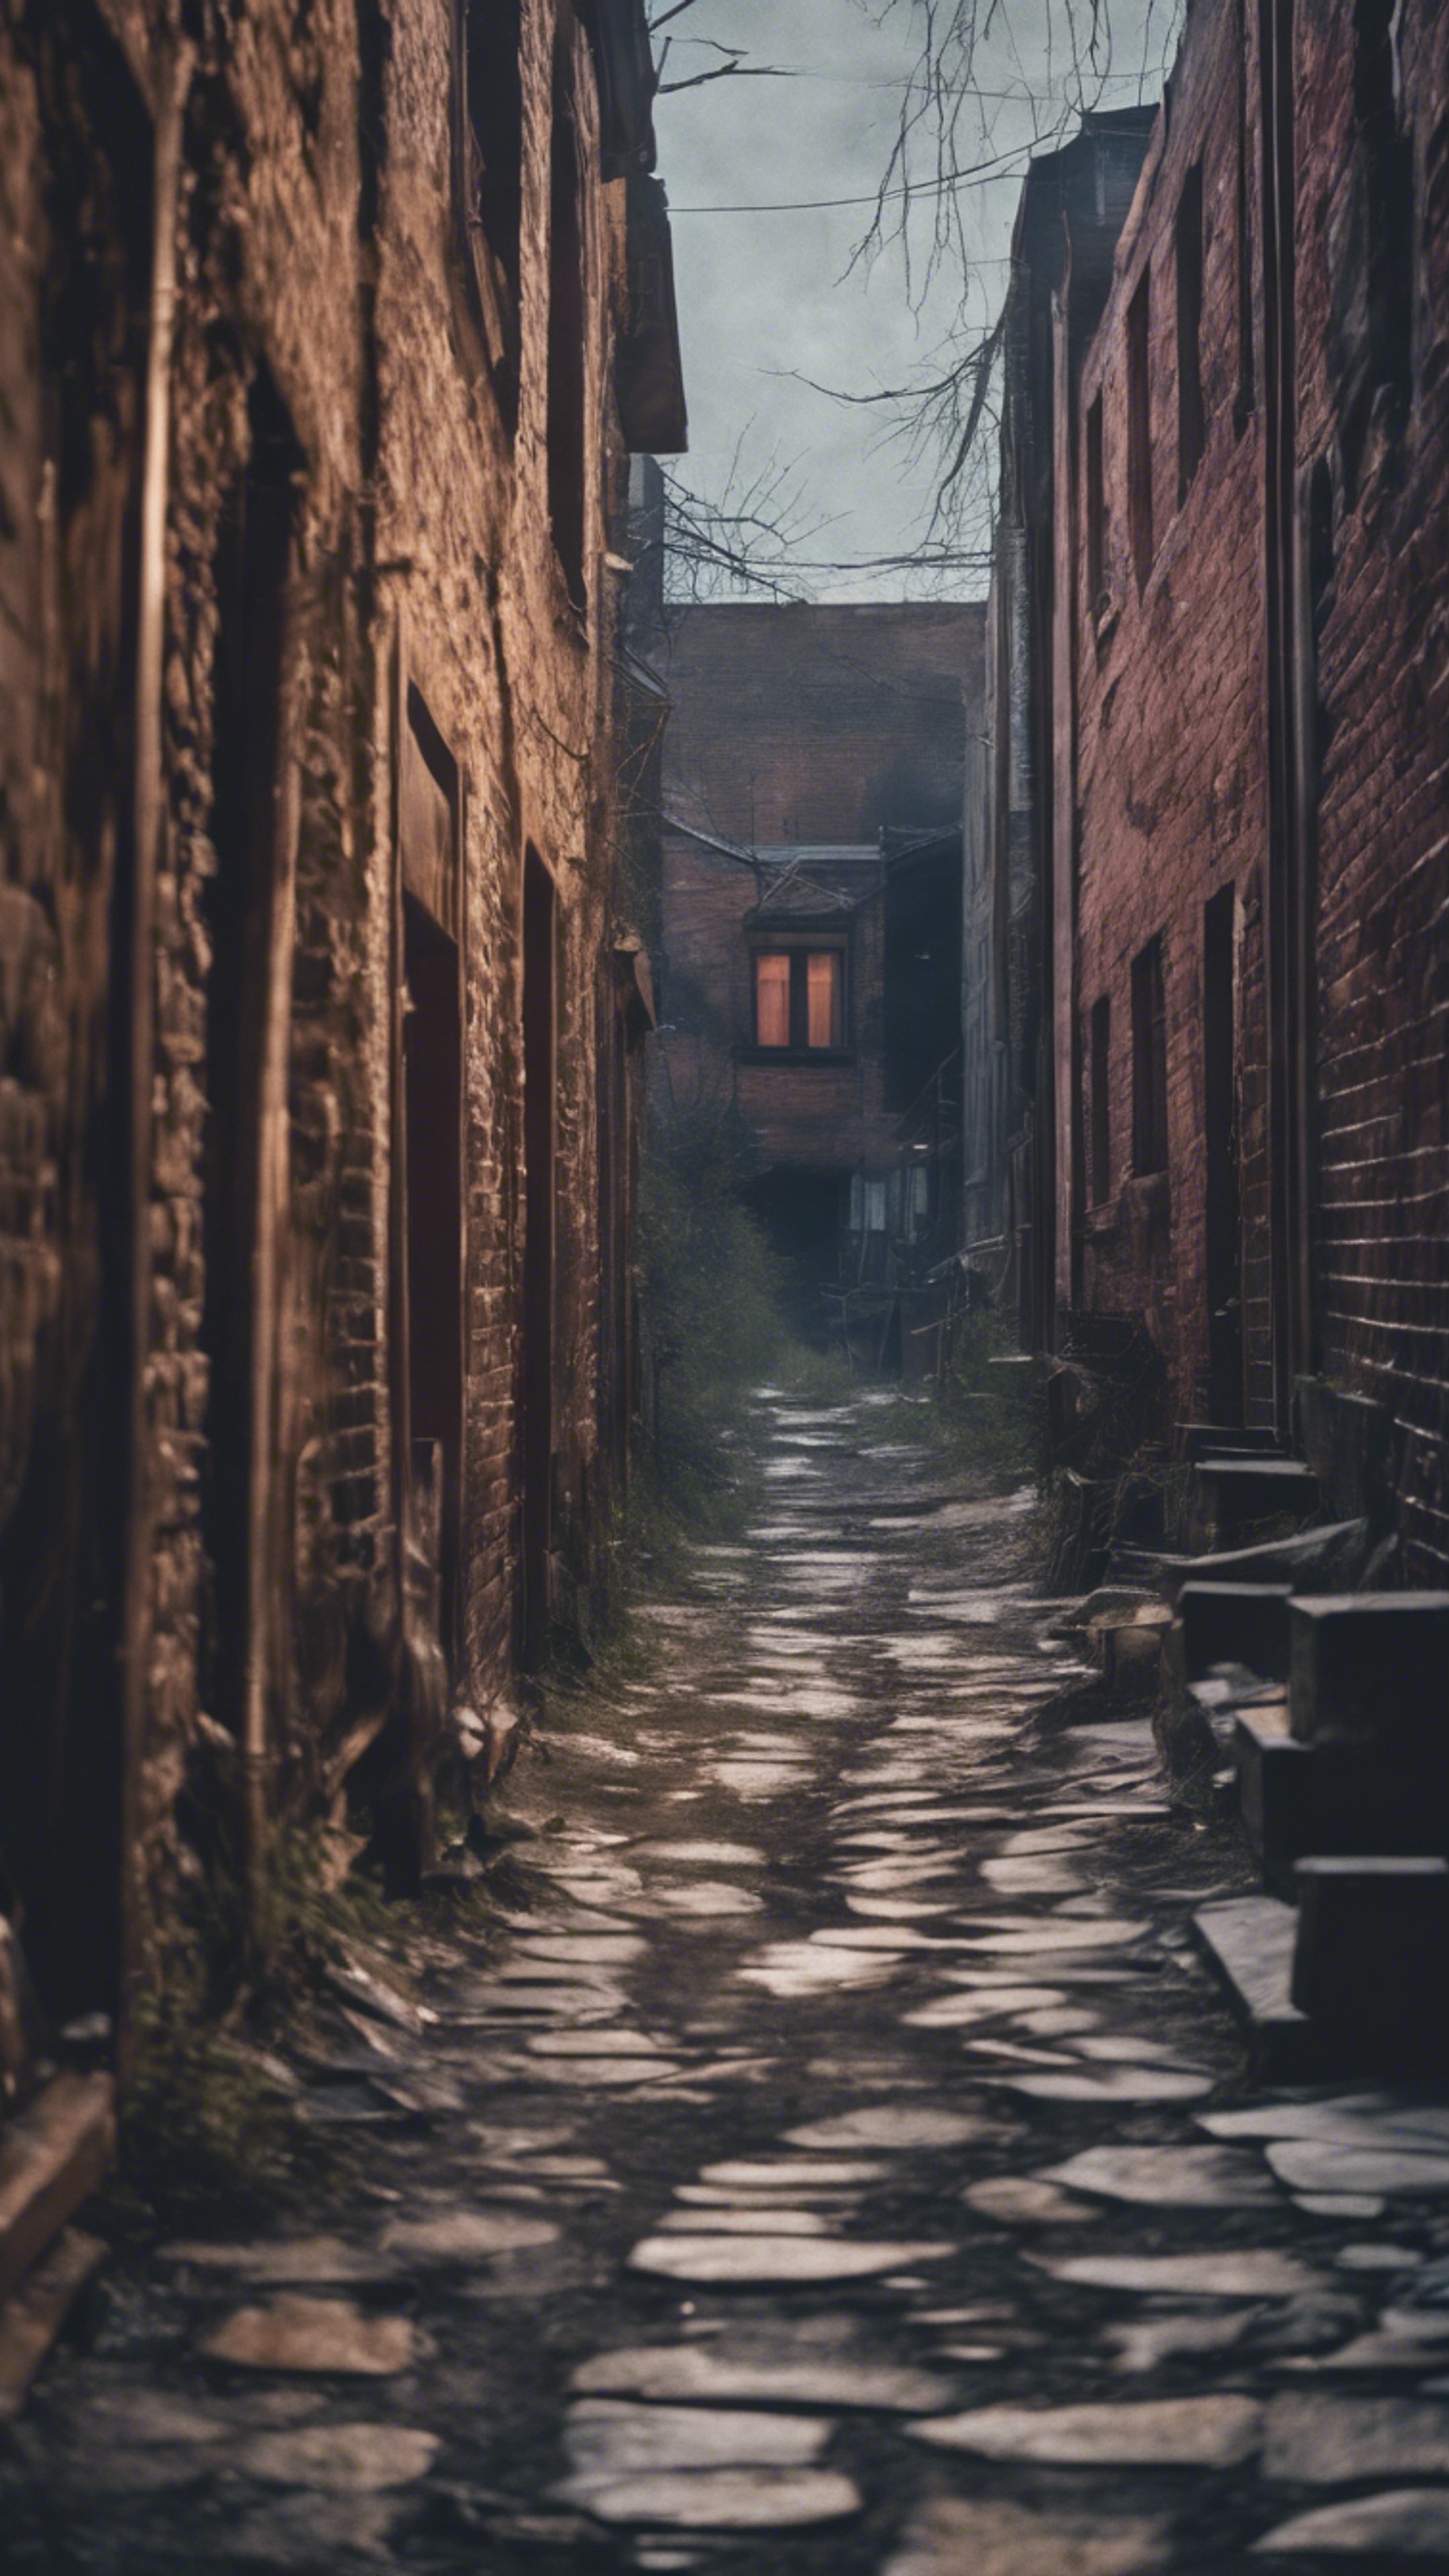 A haunted alleyway in a ghost town with spectral figures floating around. Tapéta[5b53dba013a8448c806a]